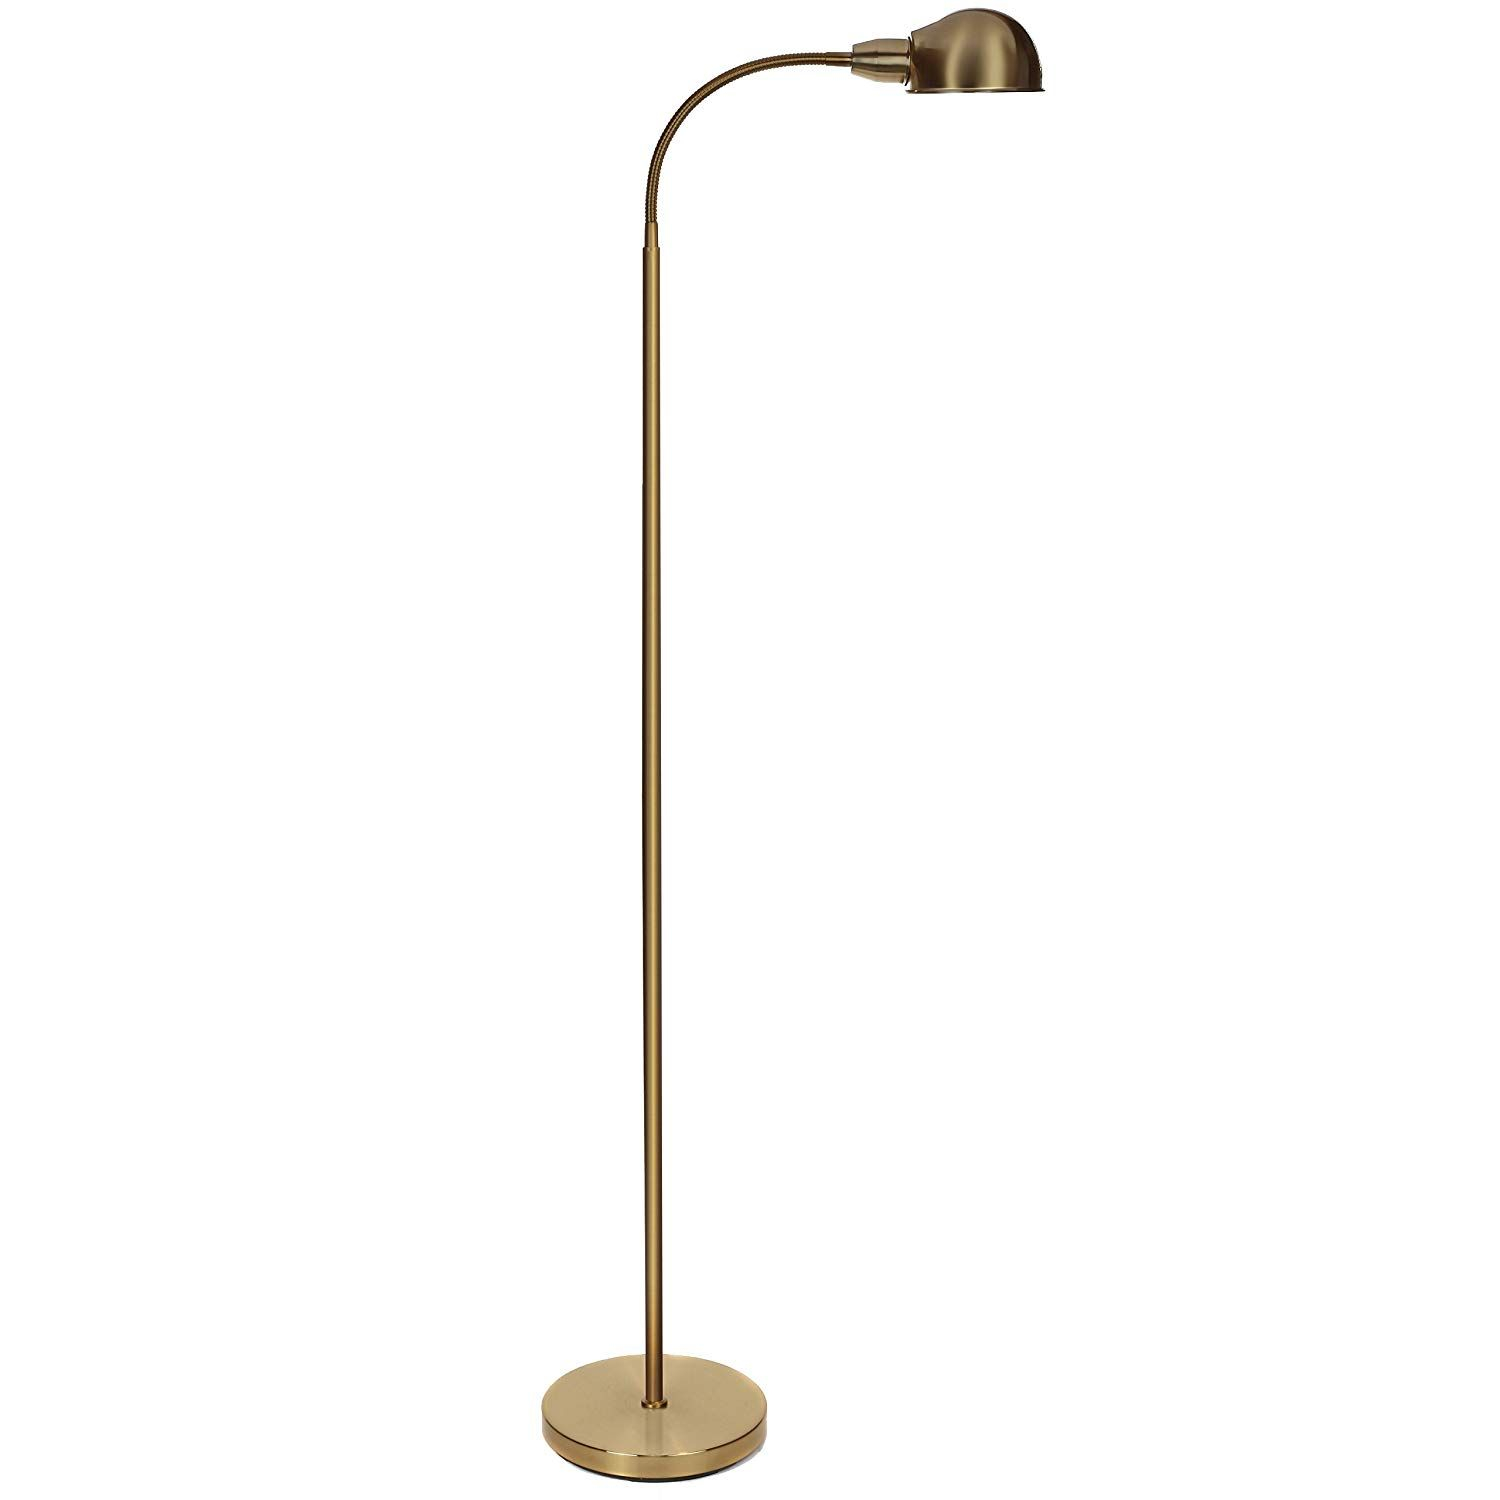 Brightech Regent Led Reading And Craft Floor Lamp throughout size 1500 X 1500